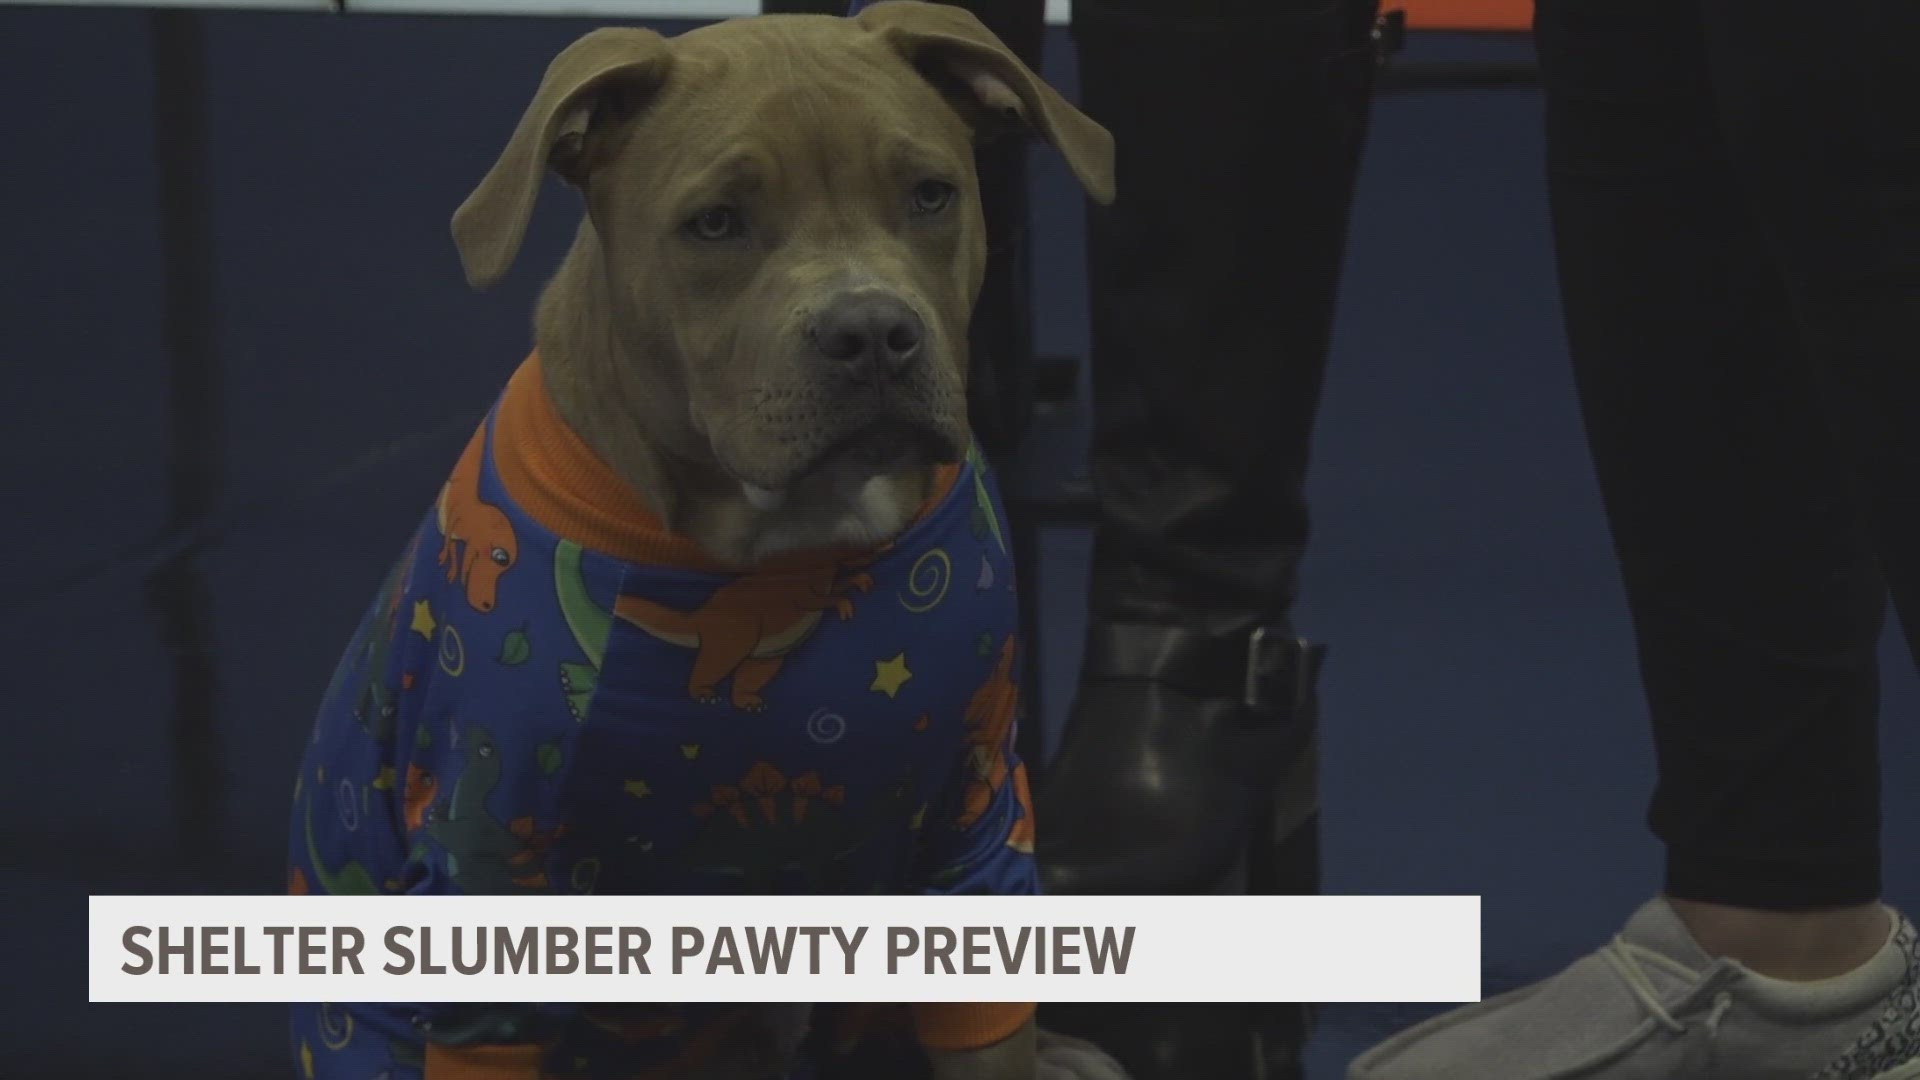 Around 70 shelters are participating in the Shelter Slumber Pawty, with two of those located in central Iowa. Learn more at https://www.shelterslumberpawty.com/